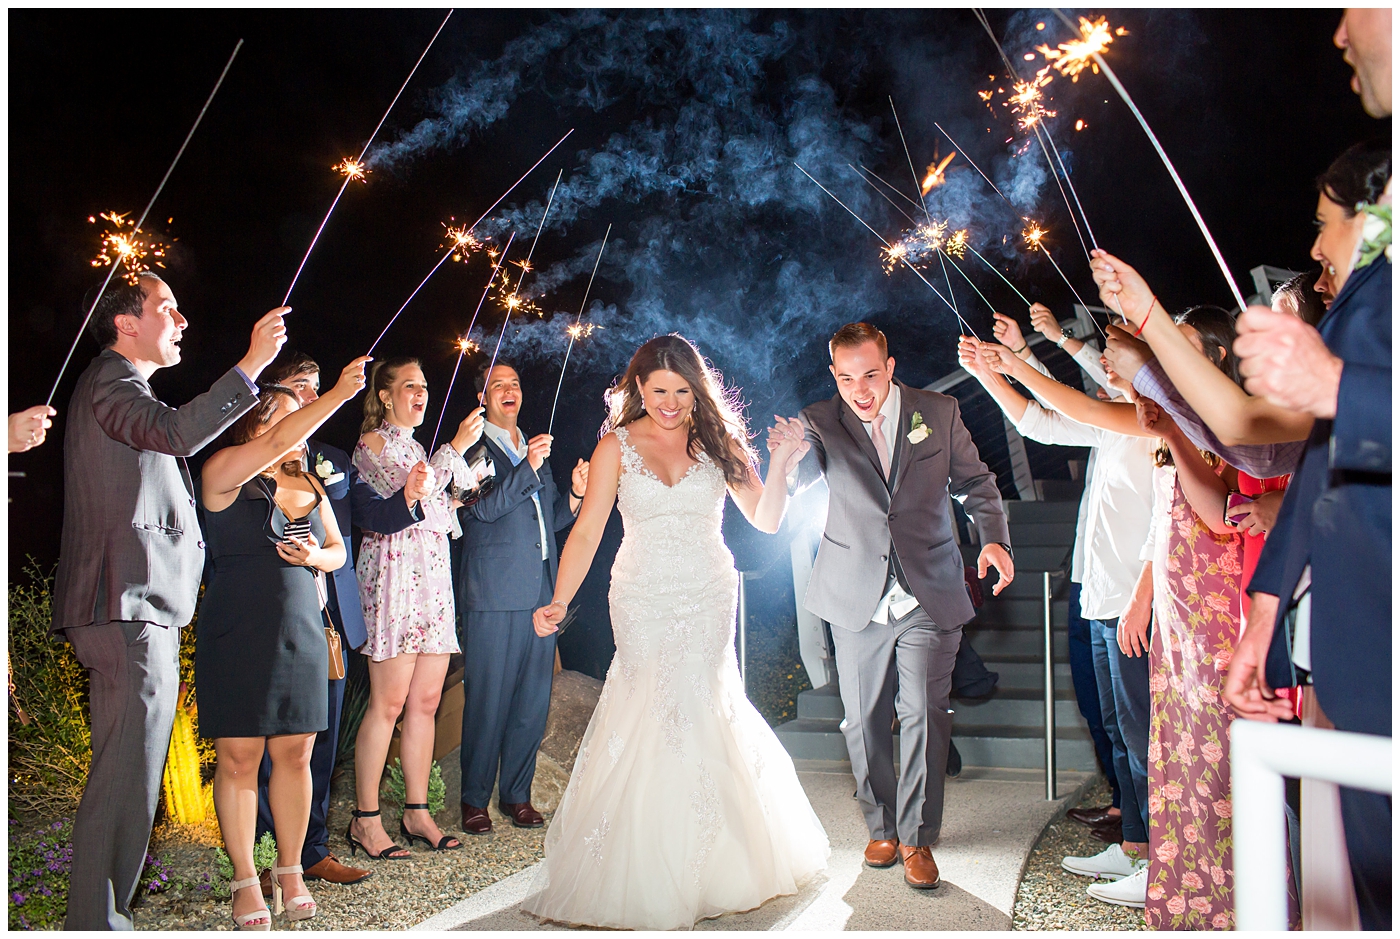 bride and groom during sparkler exit at end of outdoor wedding reception